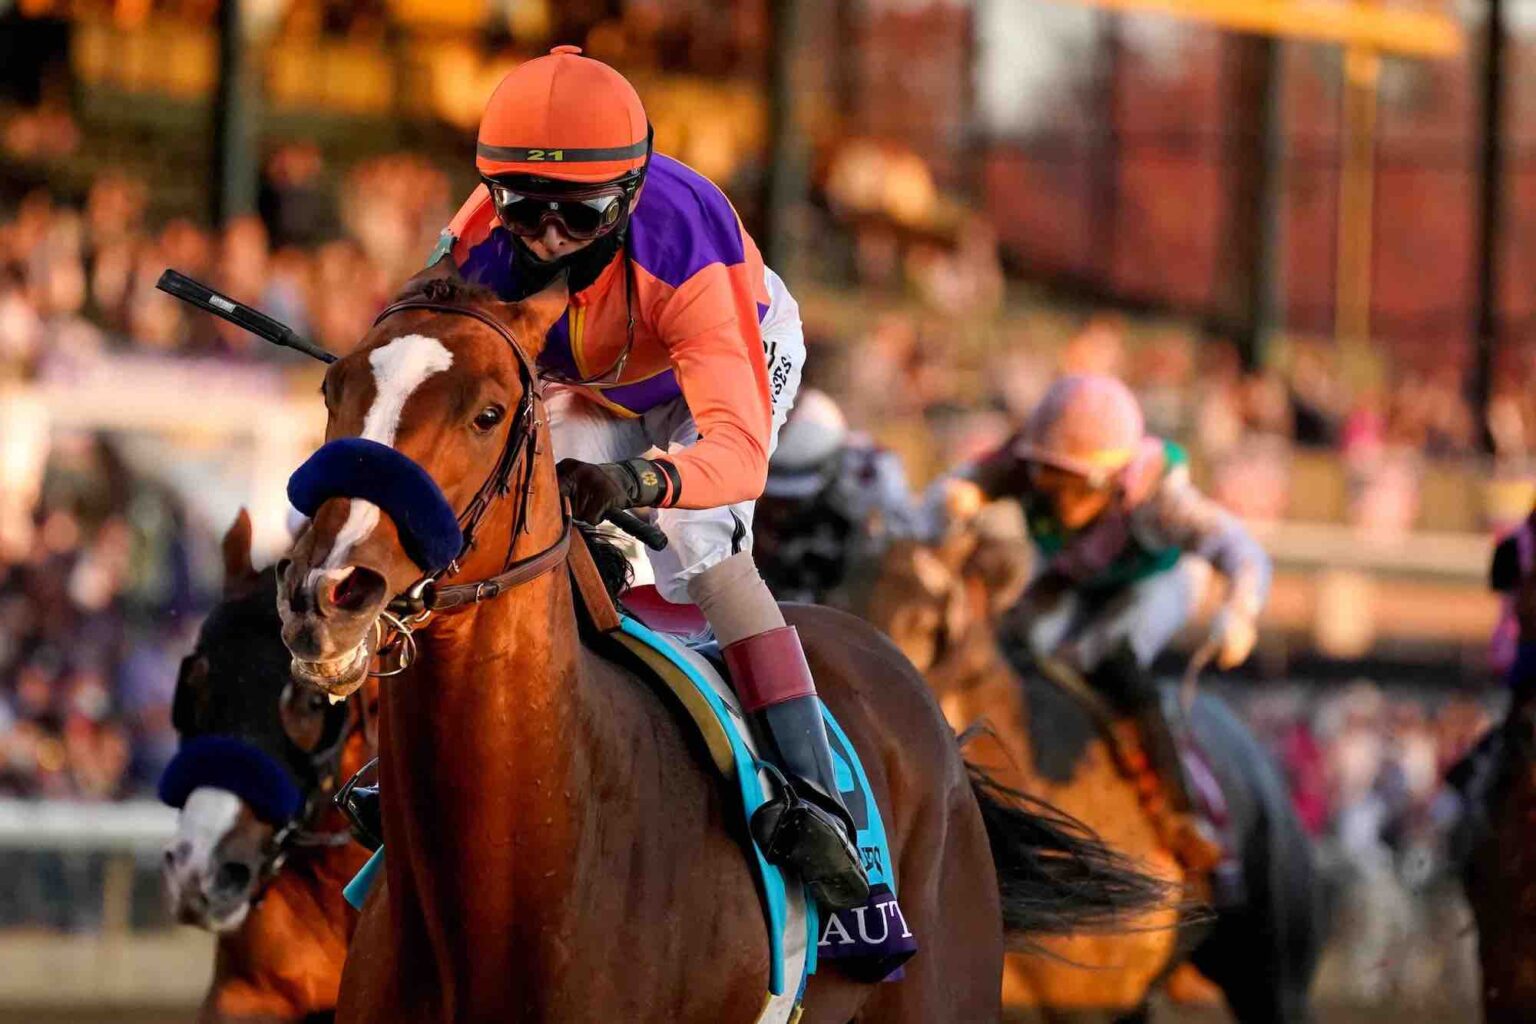 The Breeder's Cup is one of the biggest and most exciting horse racing events of 2021. Get the scoop on everything you can do while attending the race.